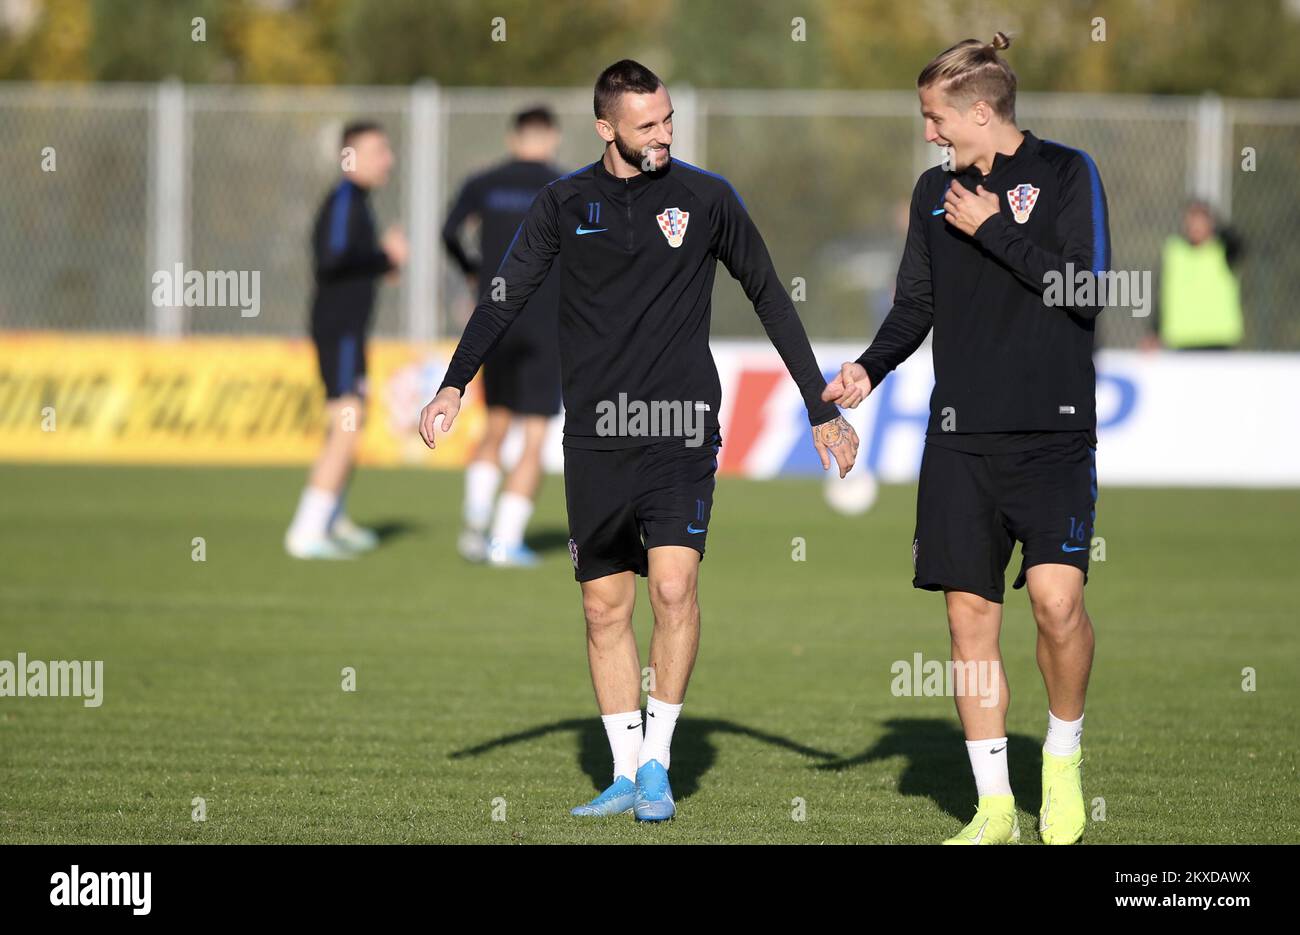 08.10.2019,Omis - Croatian national team hold second training session ahead of qualifying match for EP against Hungary. Marcelo BrozoviÄ‡, Tin Jedvaj. Croatia, Omis Photo: Ivo Cagalj/PIXSELL  Stock Photo